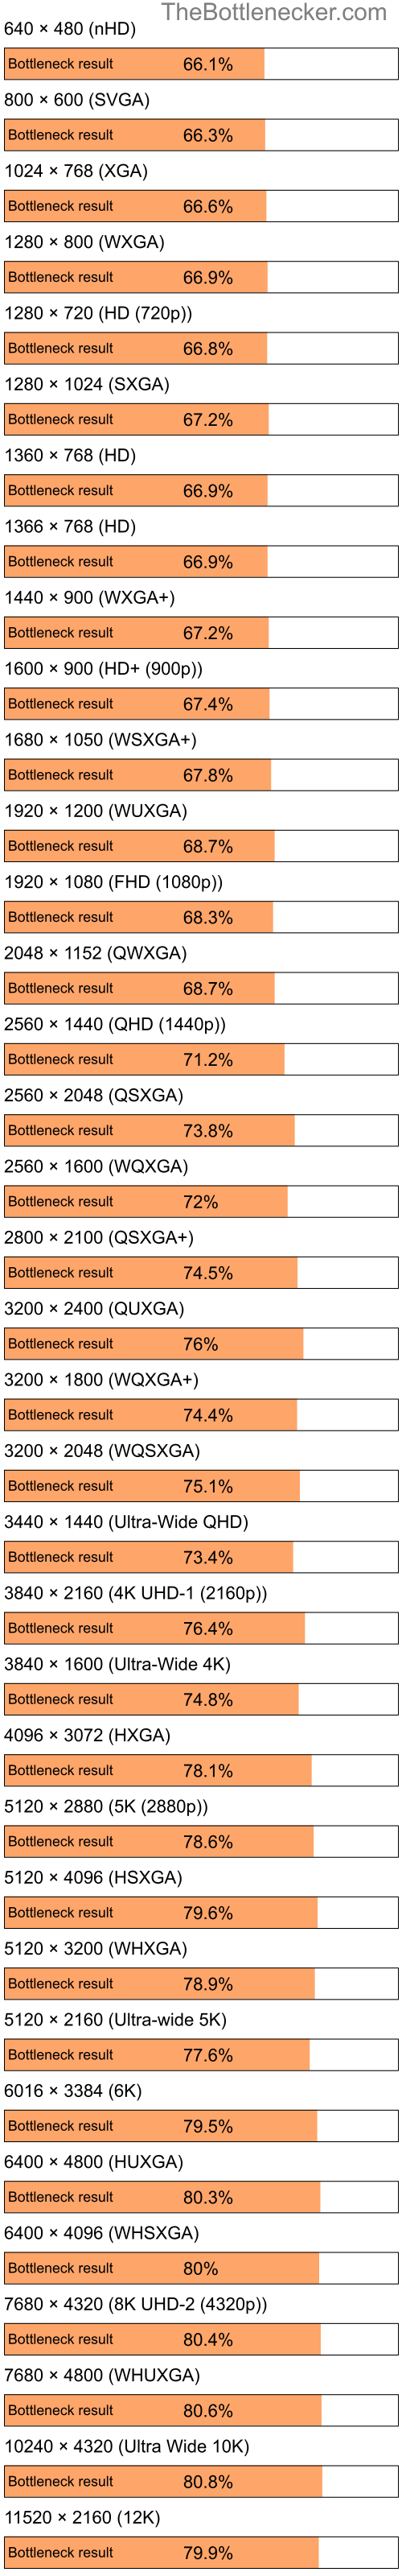 Bottleneck results by resolution for Intel Atom Z520 and AMD M860G with Mobility Radeon 4100 in General Tasks